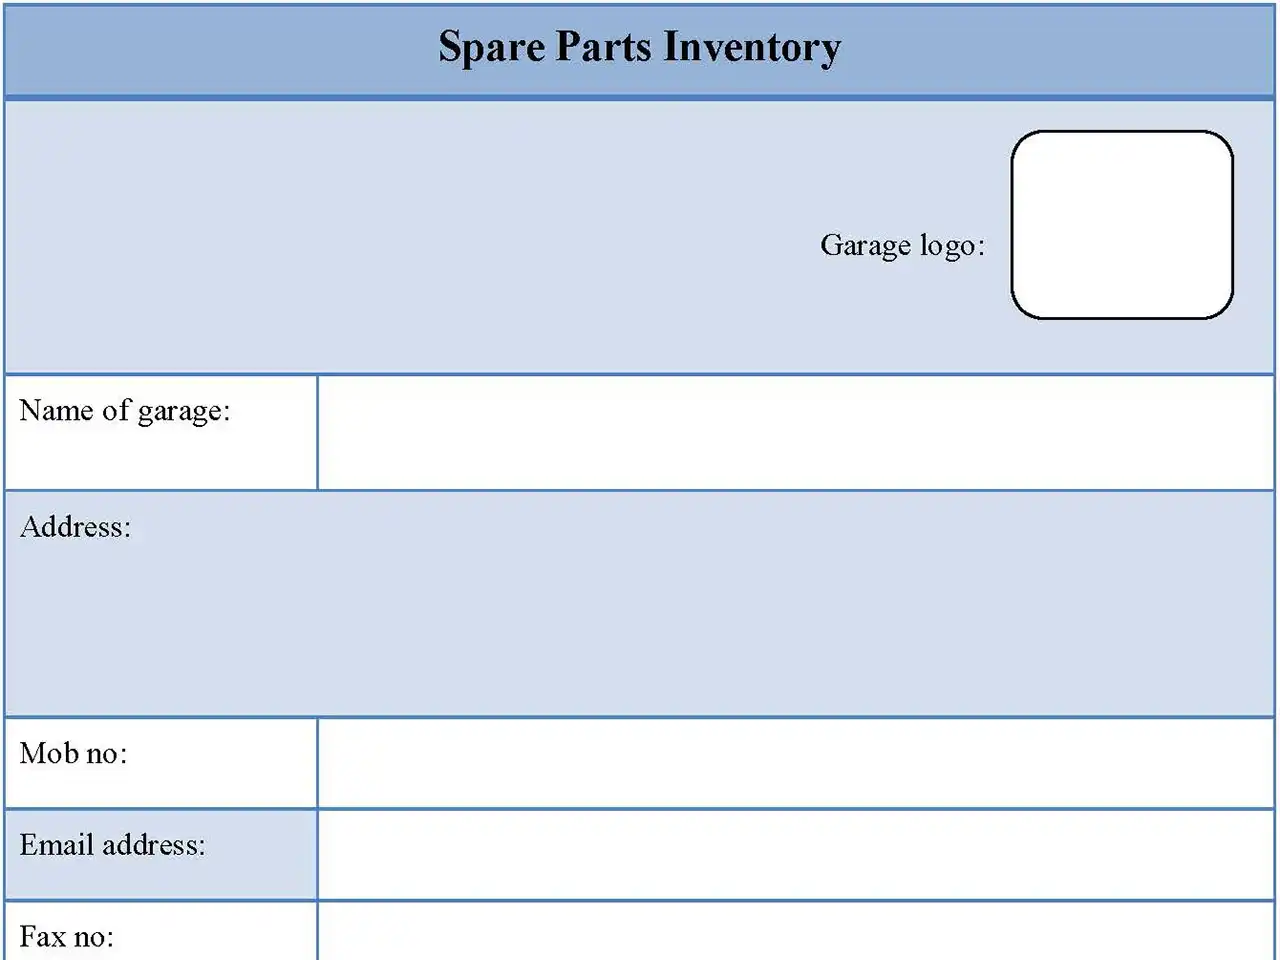 Spare Parts Inventory Form